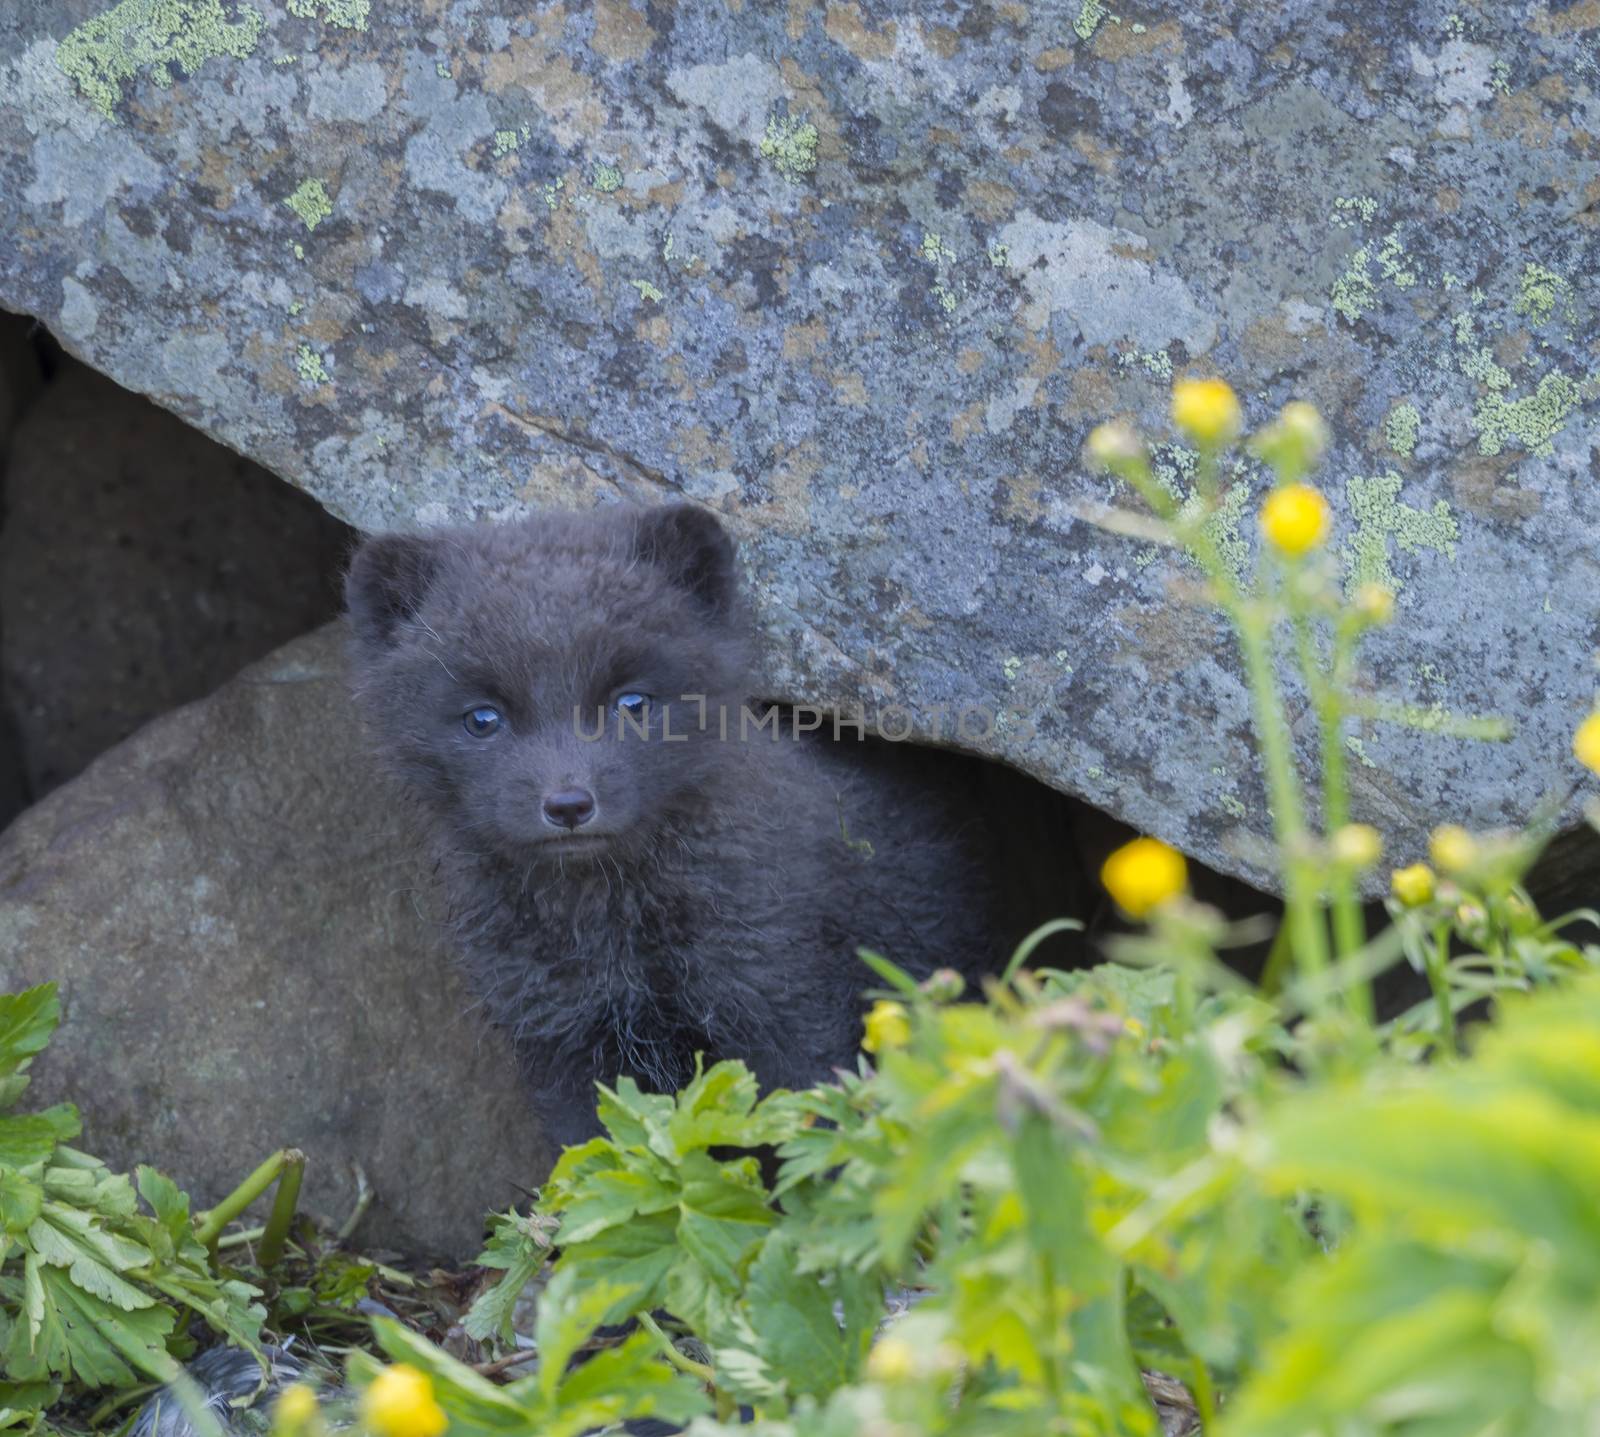 young playful arctic fox cub fox Alopex lagopus beringensis curious looking from their lair under stone, green grass plants foreground, summer in nature reserve in Hornstrandir , westfjords, Iceland, Selective focus